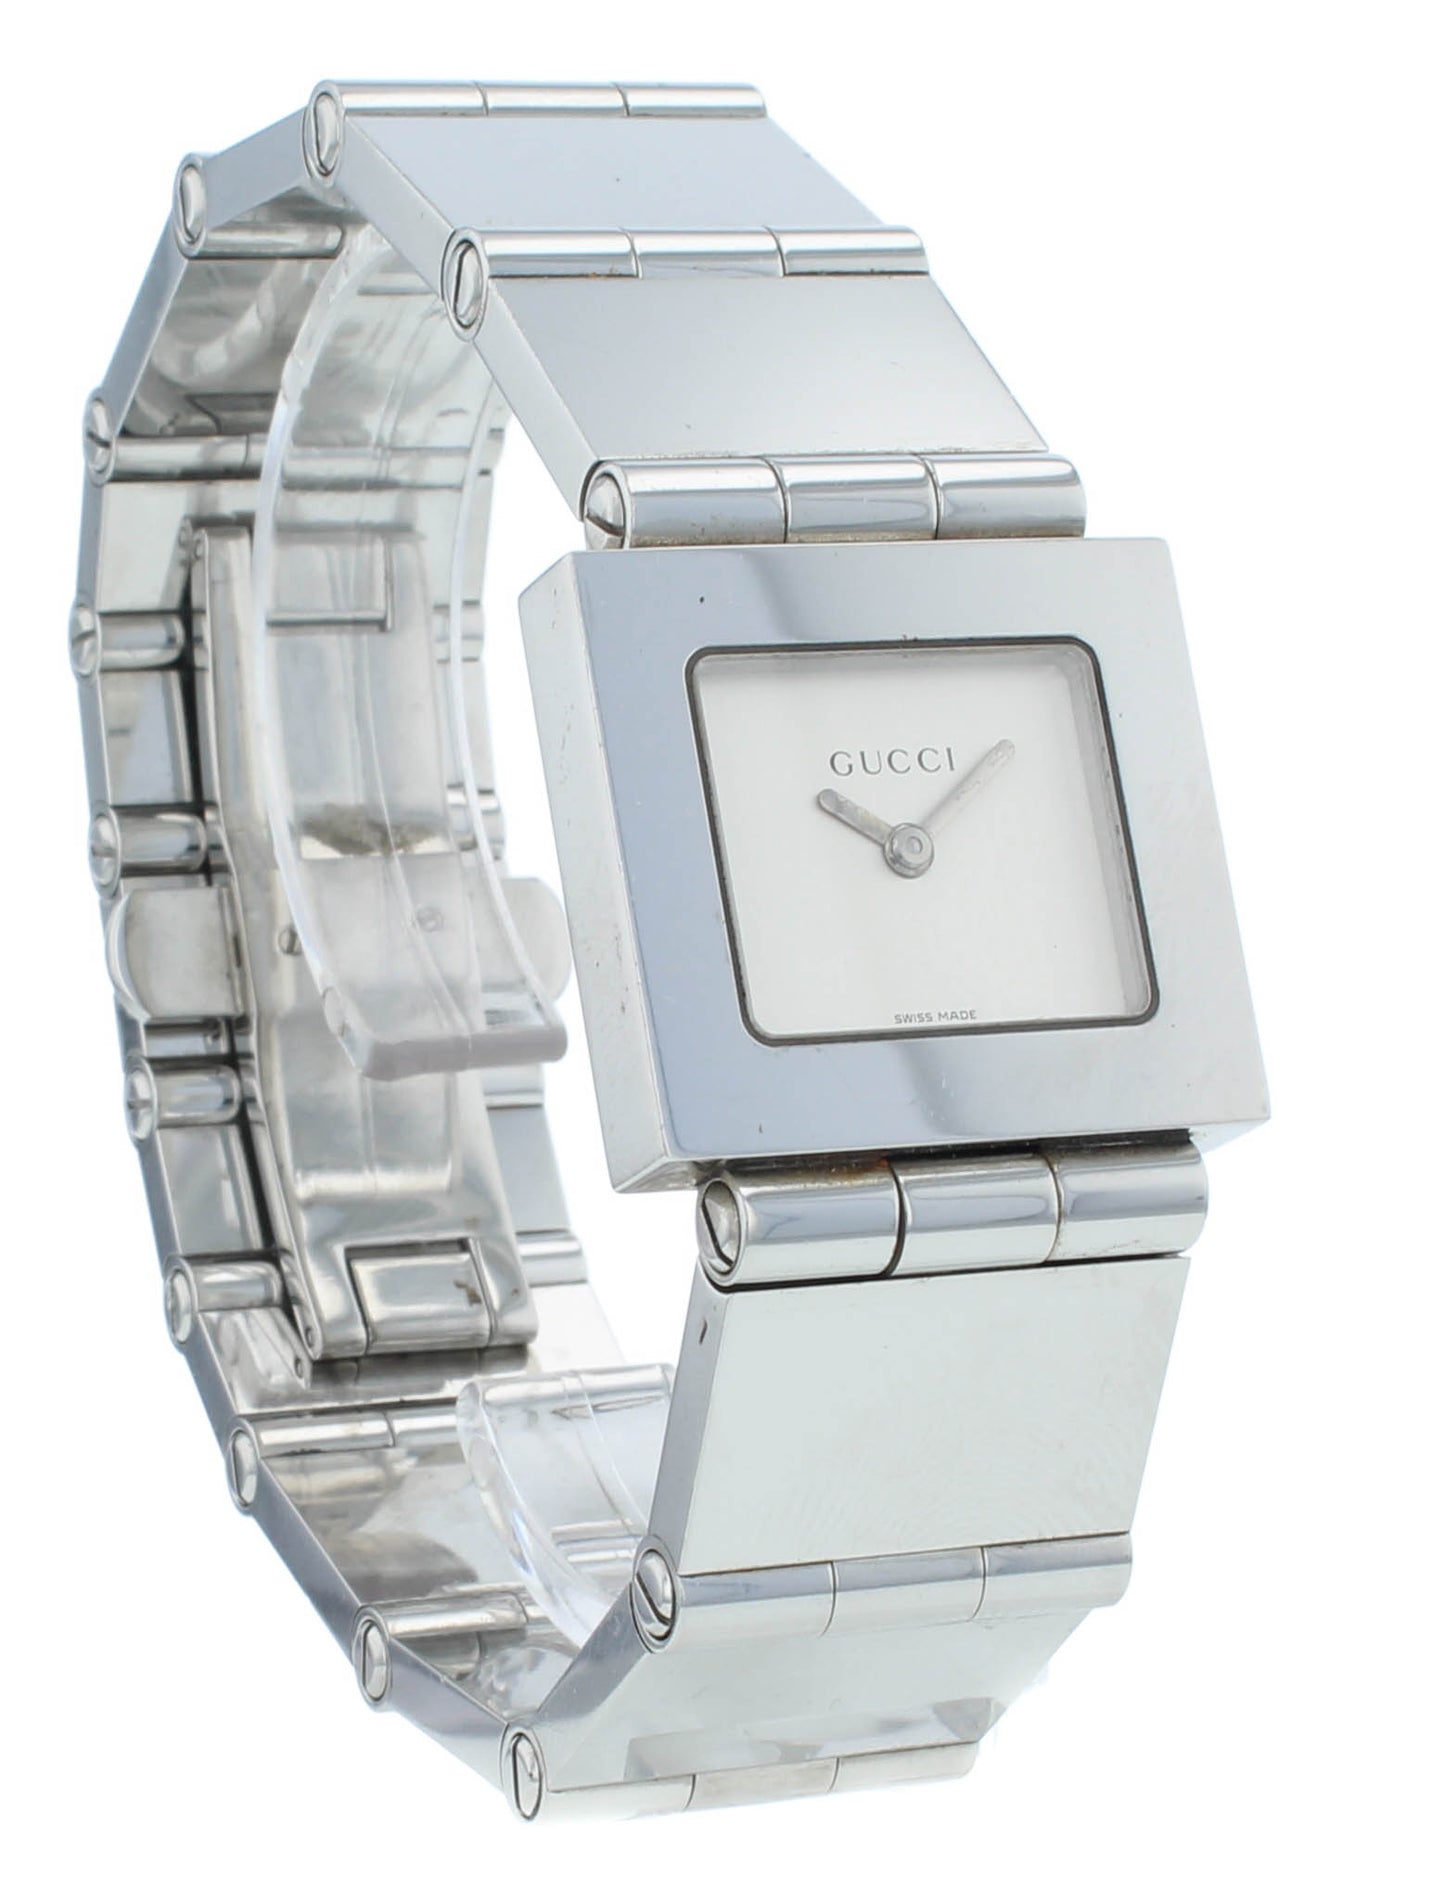 Gucci White Dial Stainless Steel 31mm Quartz Watch 600J-0005926